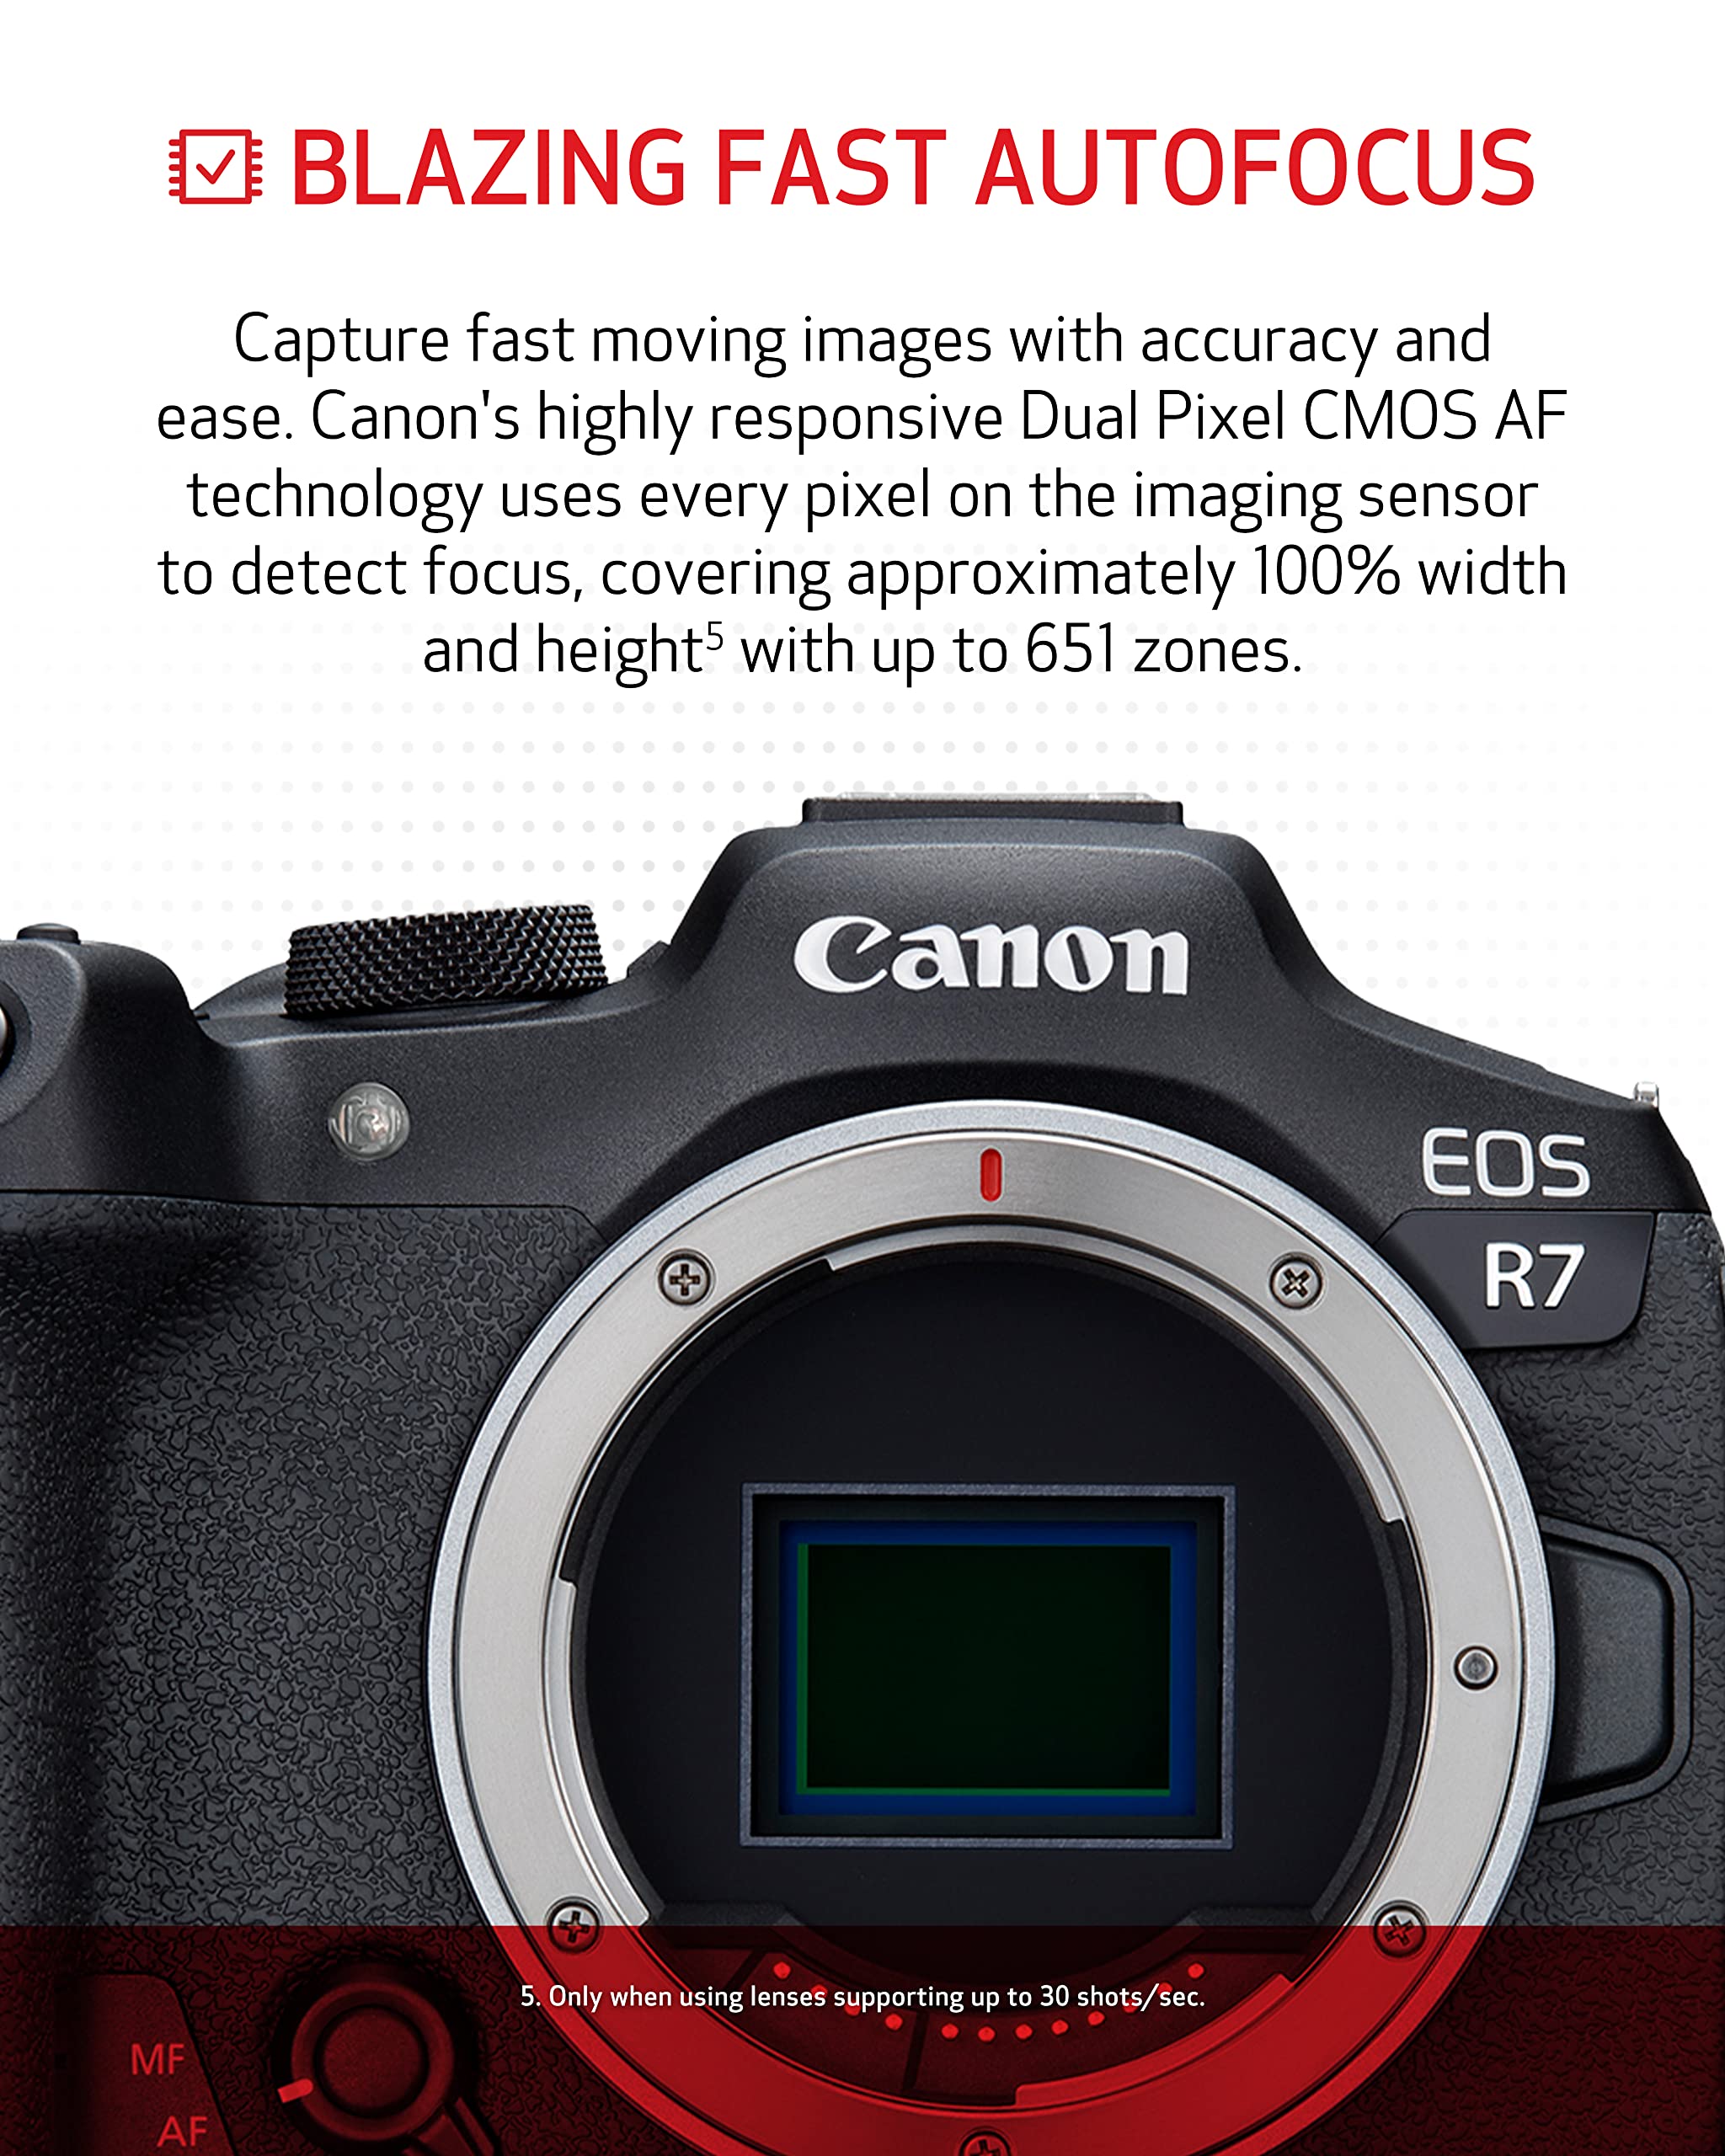 Canon EOS R7 Content Creator Kit, Mirrorless Vlogging Camera, 32.5 MP, 4K 60p Video, DIGIC X Image Processor, RF-S18-45mm F4.5-6.3 is STM Lens, Stereo Microphone, & Extra Battery Pack